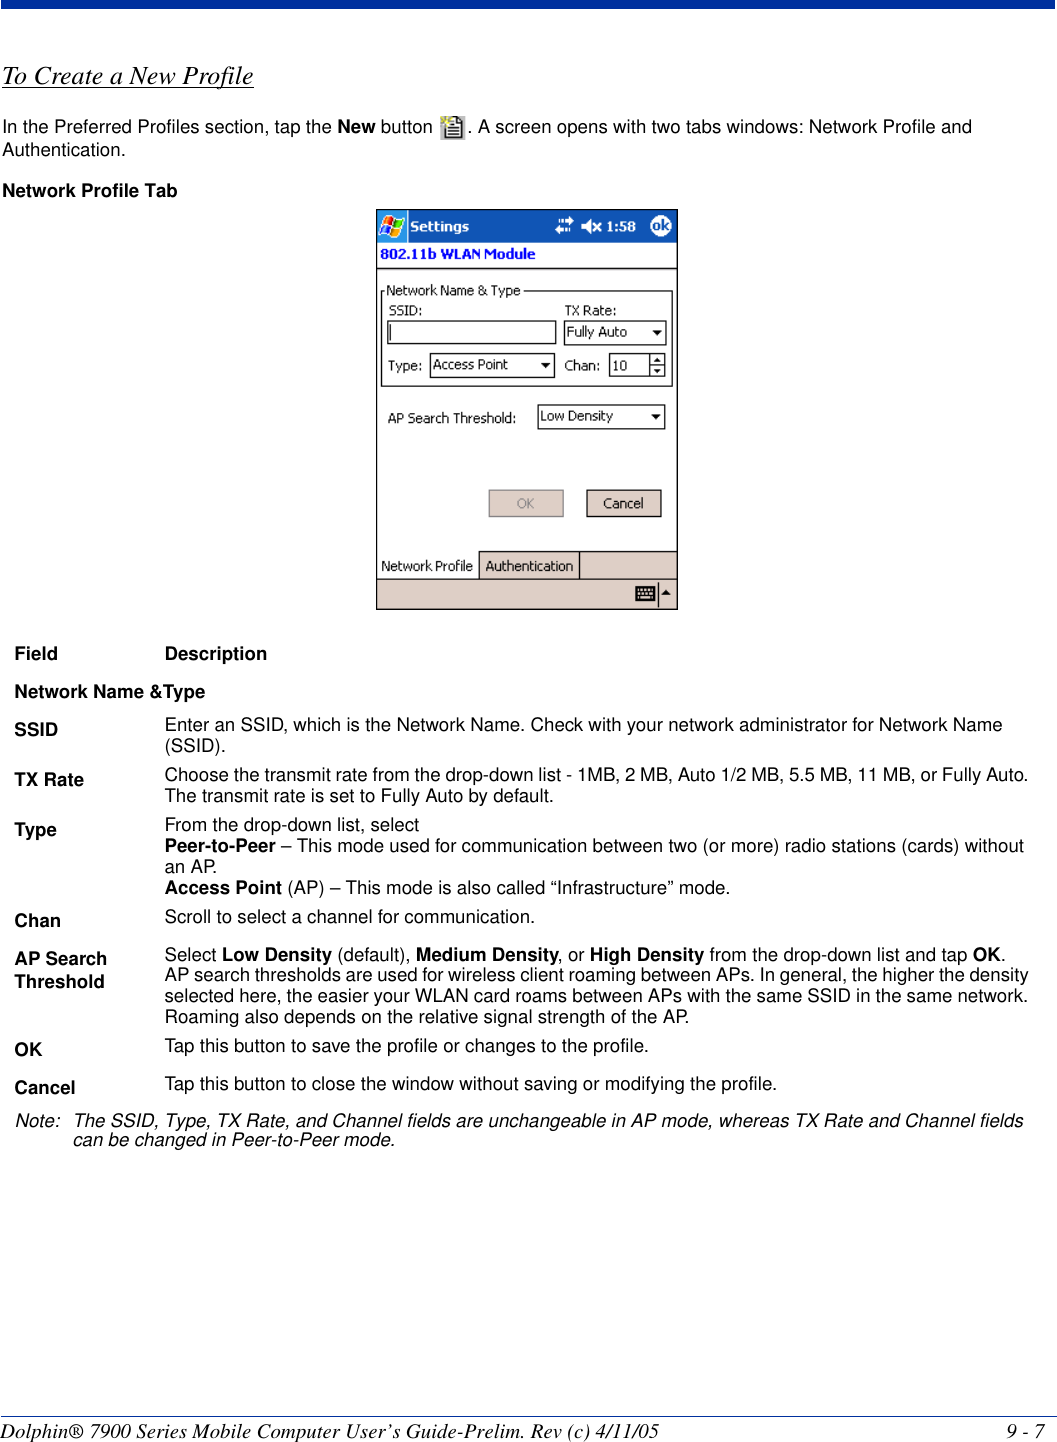 Dolphin® 7900 Series Mobile Computer User’s Guide-Prelim. Rev (c) 4/11/05 9 - 7To Create a New ProfileIn the Preferred Profiles section, tap the New button  . A screen opens with two tabs windows: Network Profile and Authentication.Network Profile Tab Field DescriptionNetwork Name &amp;TypeSSID Enter an SSID, which is the Network Name. Check with your network administrator for Network Name (SSID).TX Rate Choose the transmit rate from the drop-down list - 1MB, 2 MB, Auto 1/2 MB, 5.5 MB, 11 MB, or Fully Auto. The transmit rate is set to Fully Auto by default. Type From the drop-down list, selectPeer-to-Peer – This mode used for communication between two (or more) radio stations (cards) without an AP. Access Point (AP) – This mode is also called “Infrastructure” mode. Chan Scroll to select a channel for communication. AP Search ThresholdSelect Low Density (default), Medium Density, or High Density from the drop-down list and tap OK. AP search thresholds are used for wireless client roaming between APs. In general, the higher the density selected here, the easier your WLAN card roams between APs with the same SSID in the same network. Roaming also depends on the relative signal strength of the AP.OK Tap this button to save the profile or changes to the profile.Cancel Tap this button to close the window without saving or modifying the profile.Note: The SSID, Type, TX Rate, and Channel fields are unchangeable in AP mode, whereas TX Rate and Channel fields can be changed in Peer-to-Peer mode.